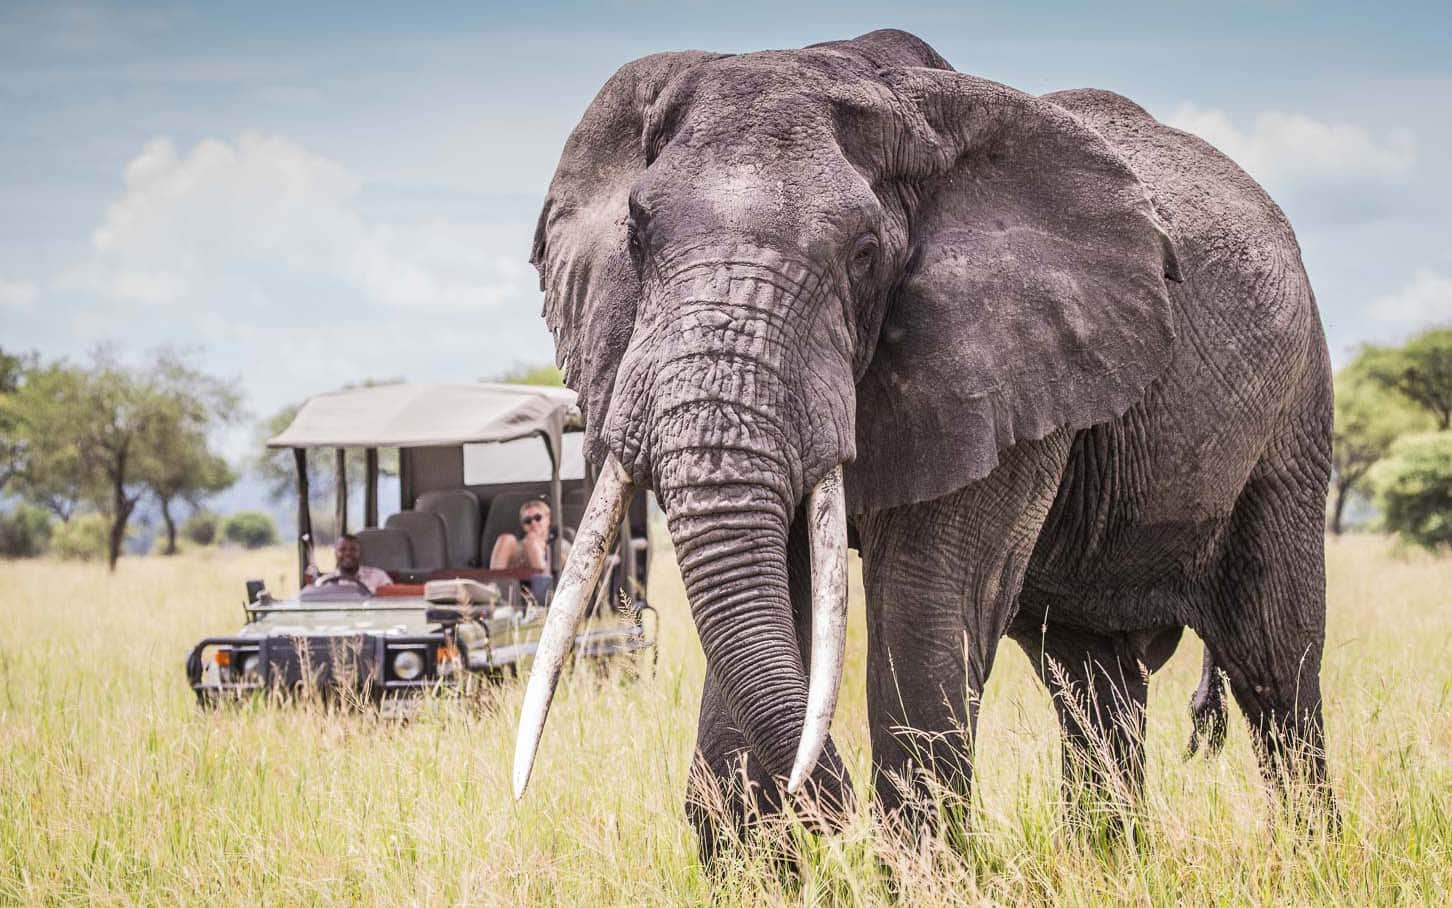 An elephant in the Serengeti – a national park to experience when you travel Tanzania.